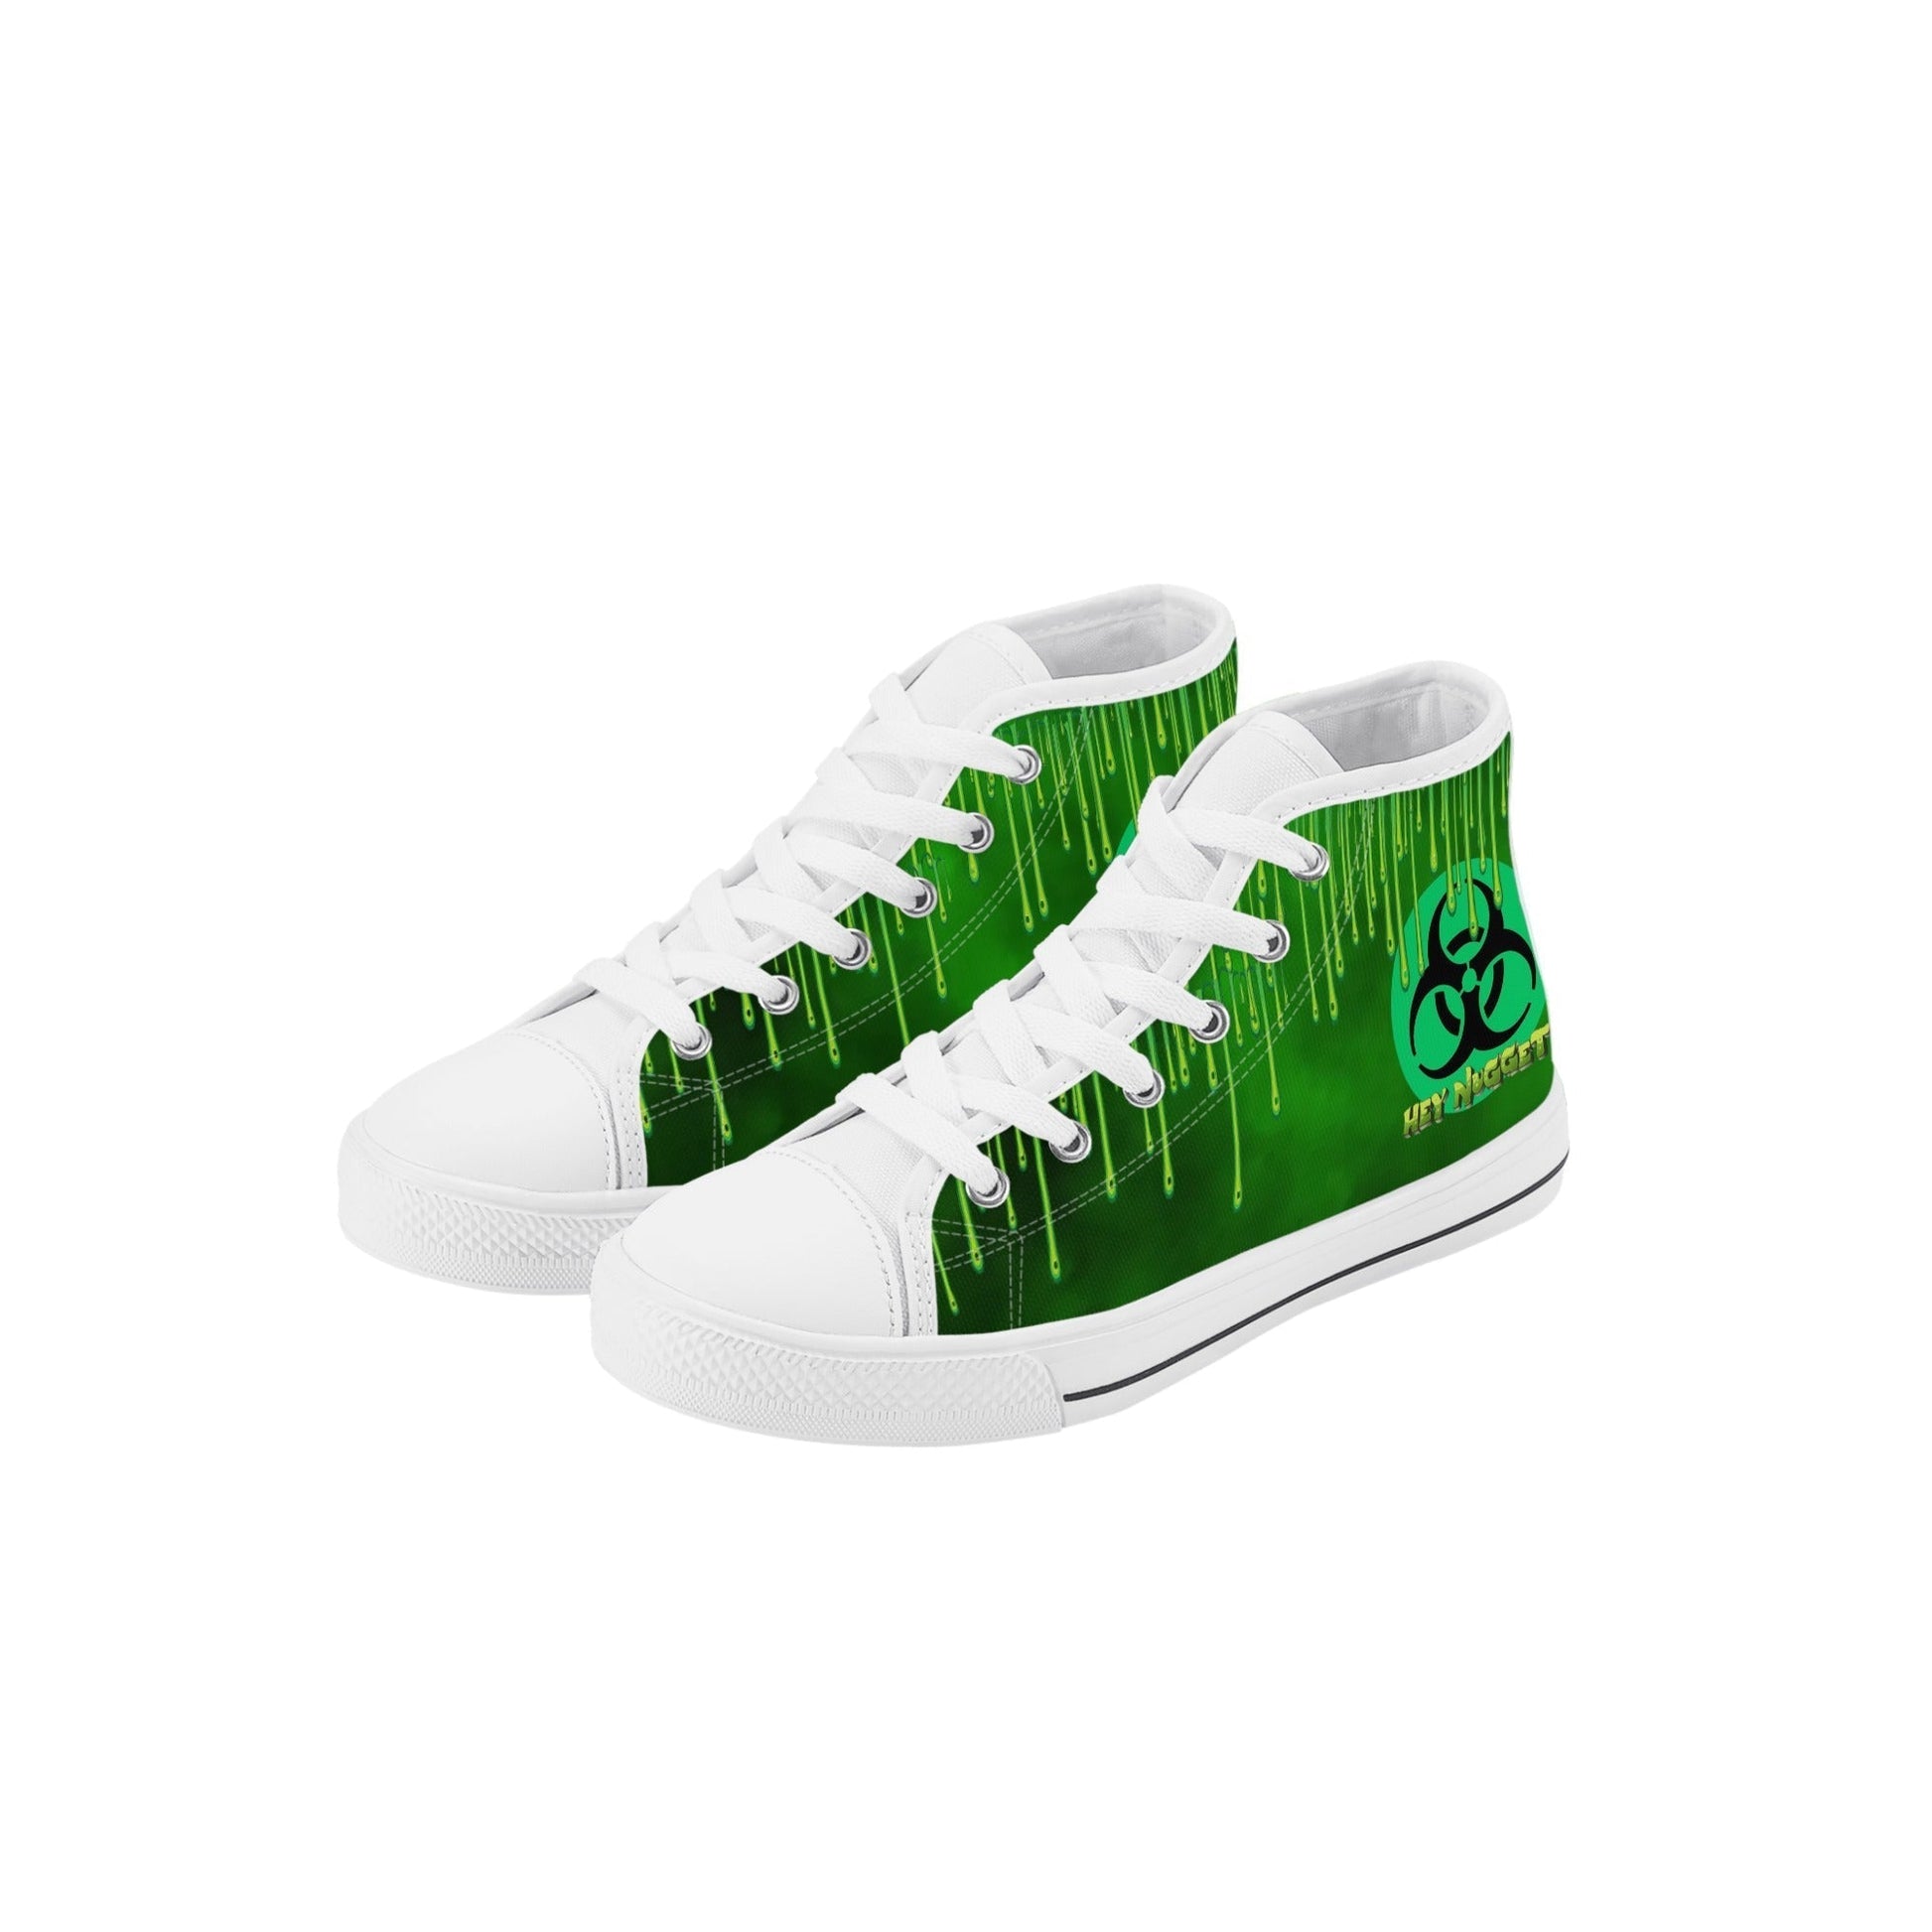 Stand out  with the  Toxic Kids High Top Canvas Shoes  available at Hey Nugget. Grab yours today!